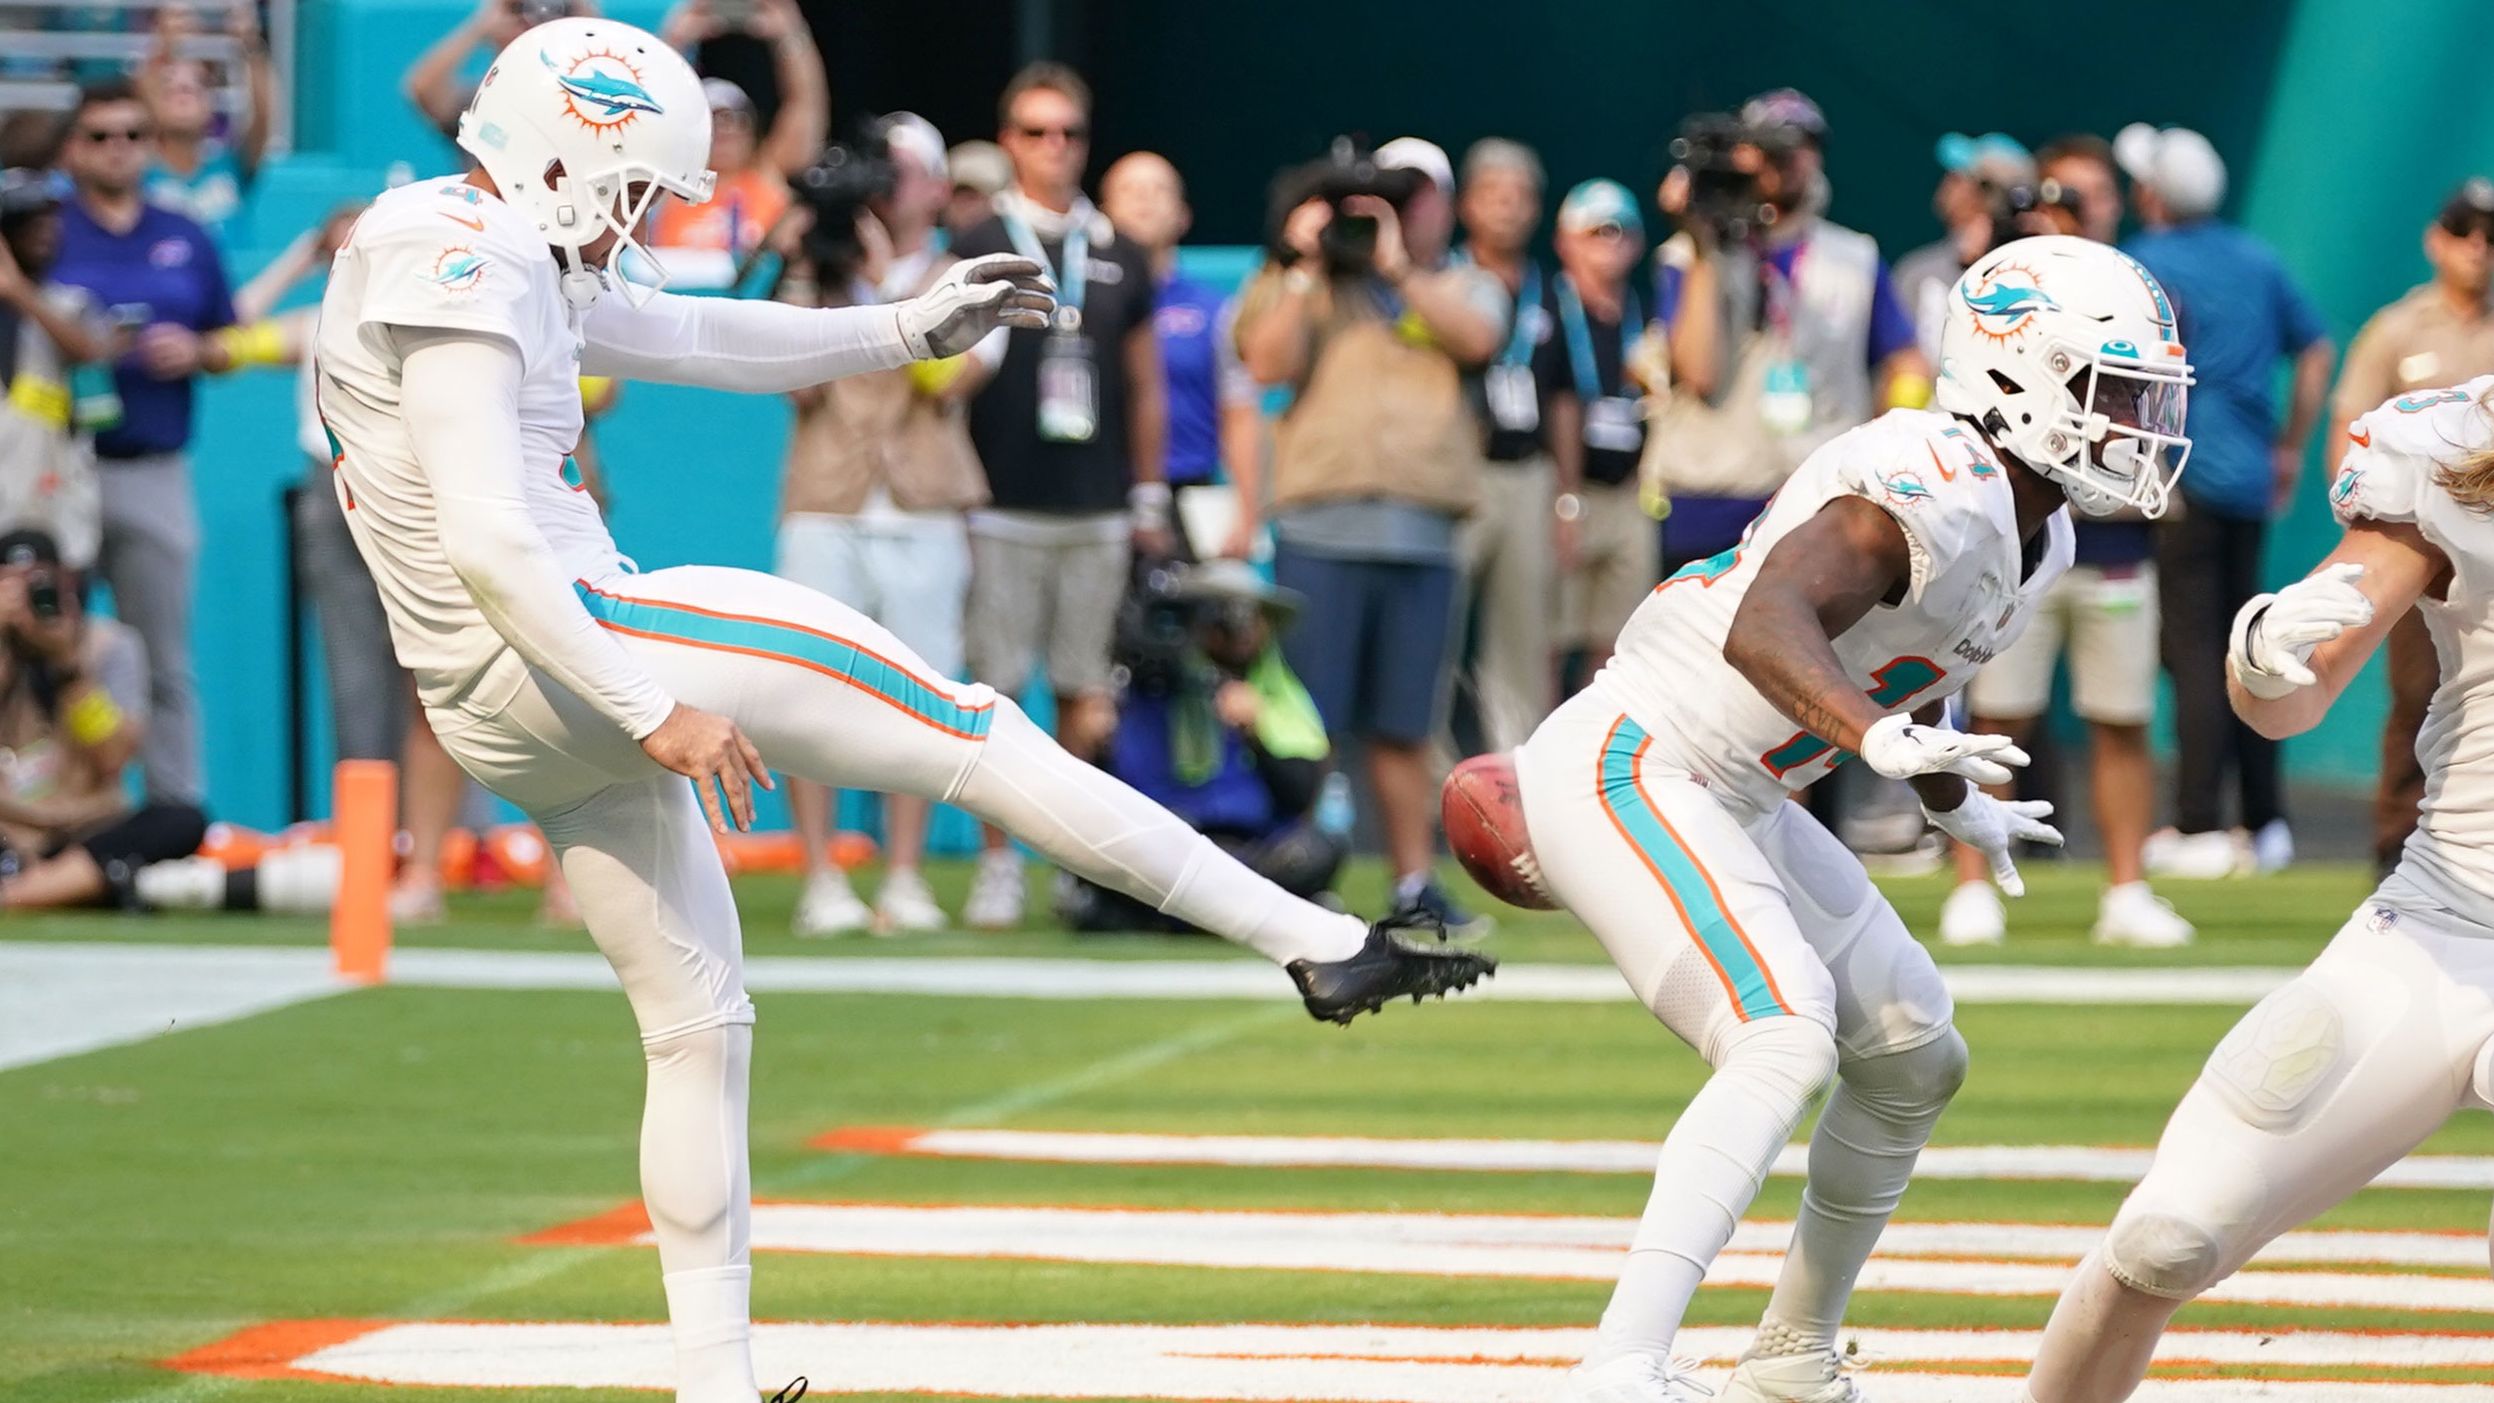 Miami's Thomas Morstead punts the ball into the backside of teammate Trent Sherfield during an NFL game against Buffalo on Sunday, September 25. The play resulted in a safety for Buffalo, but Miami went on to win 21-19. <a href="https://www.cnn.com/2022/09/12/sport/gallery/nfl-2022-season" target="_blank">See the best photos from the 2022 NFL season.</a>